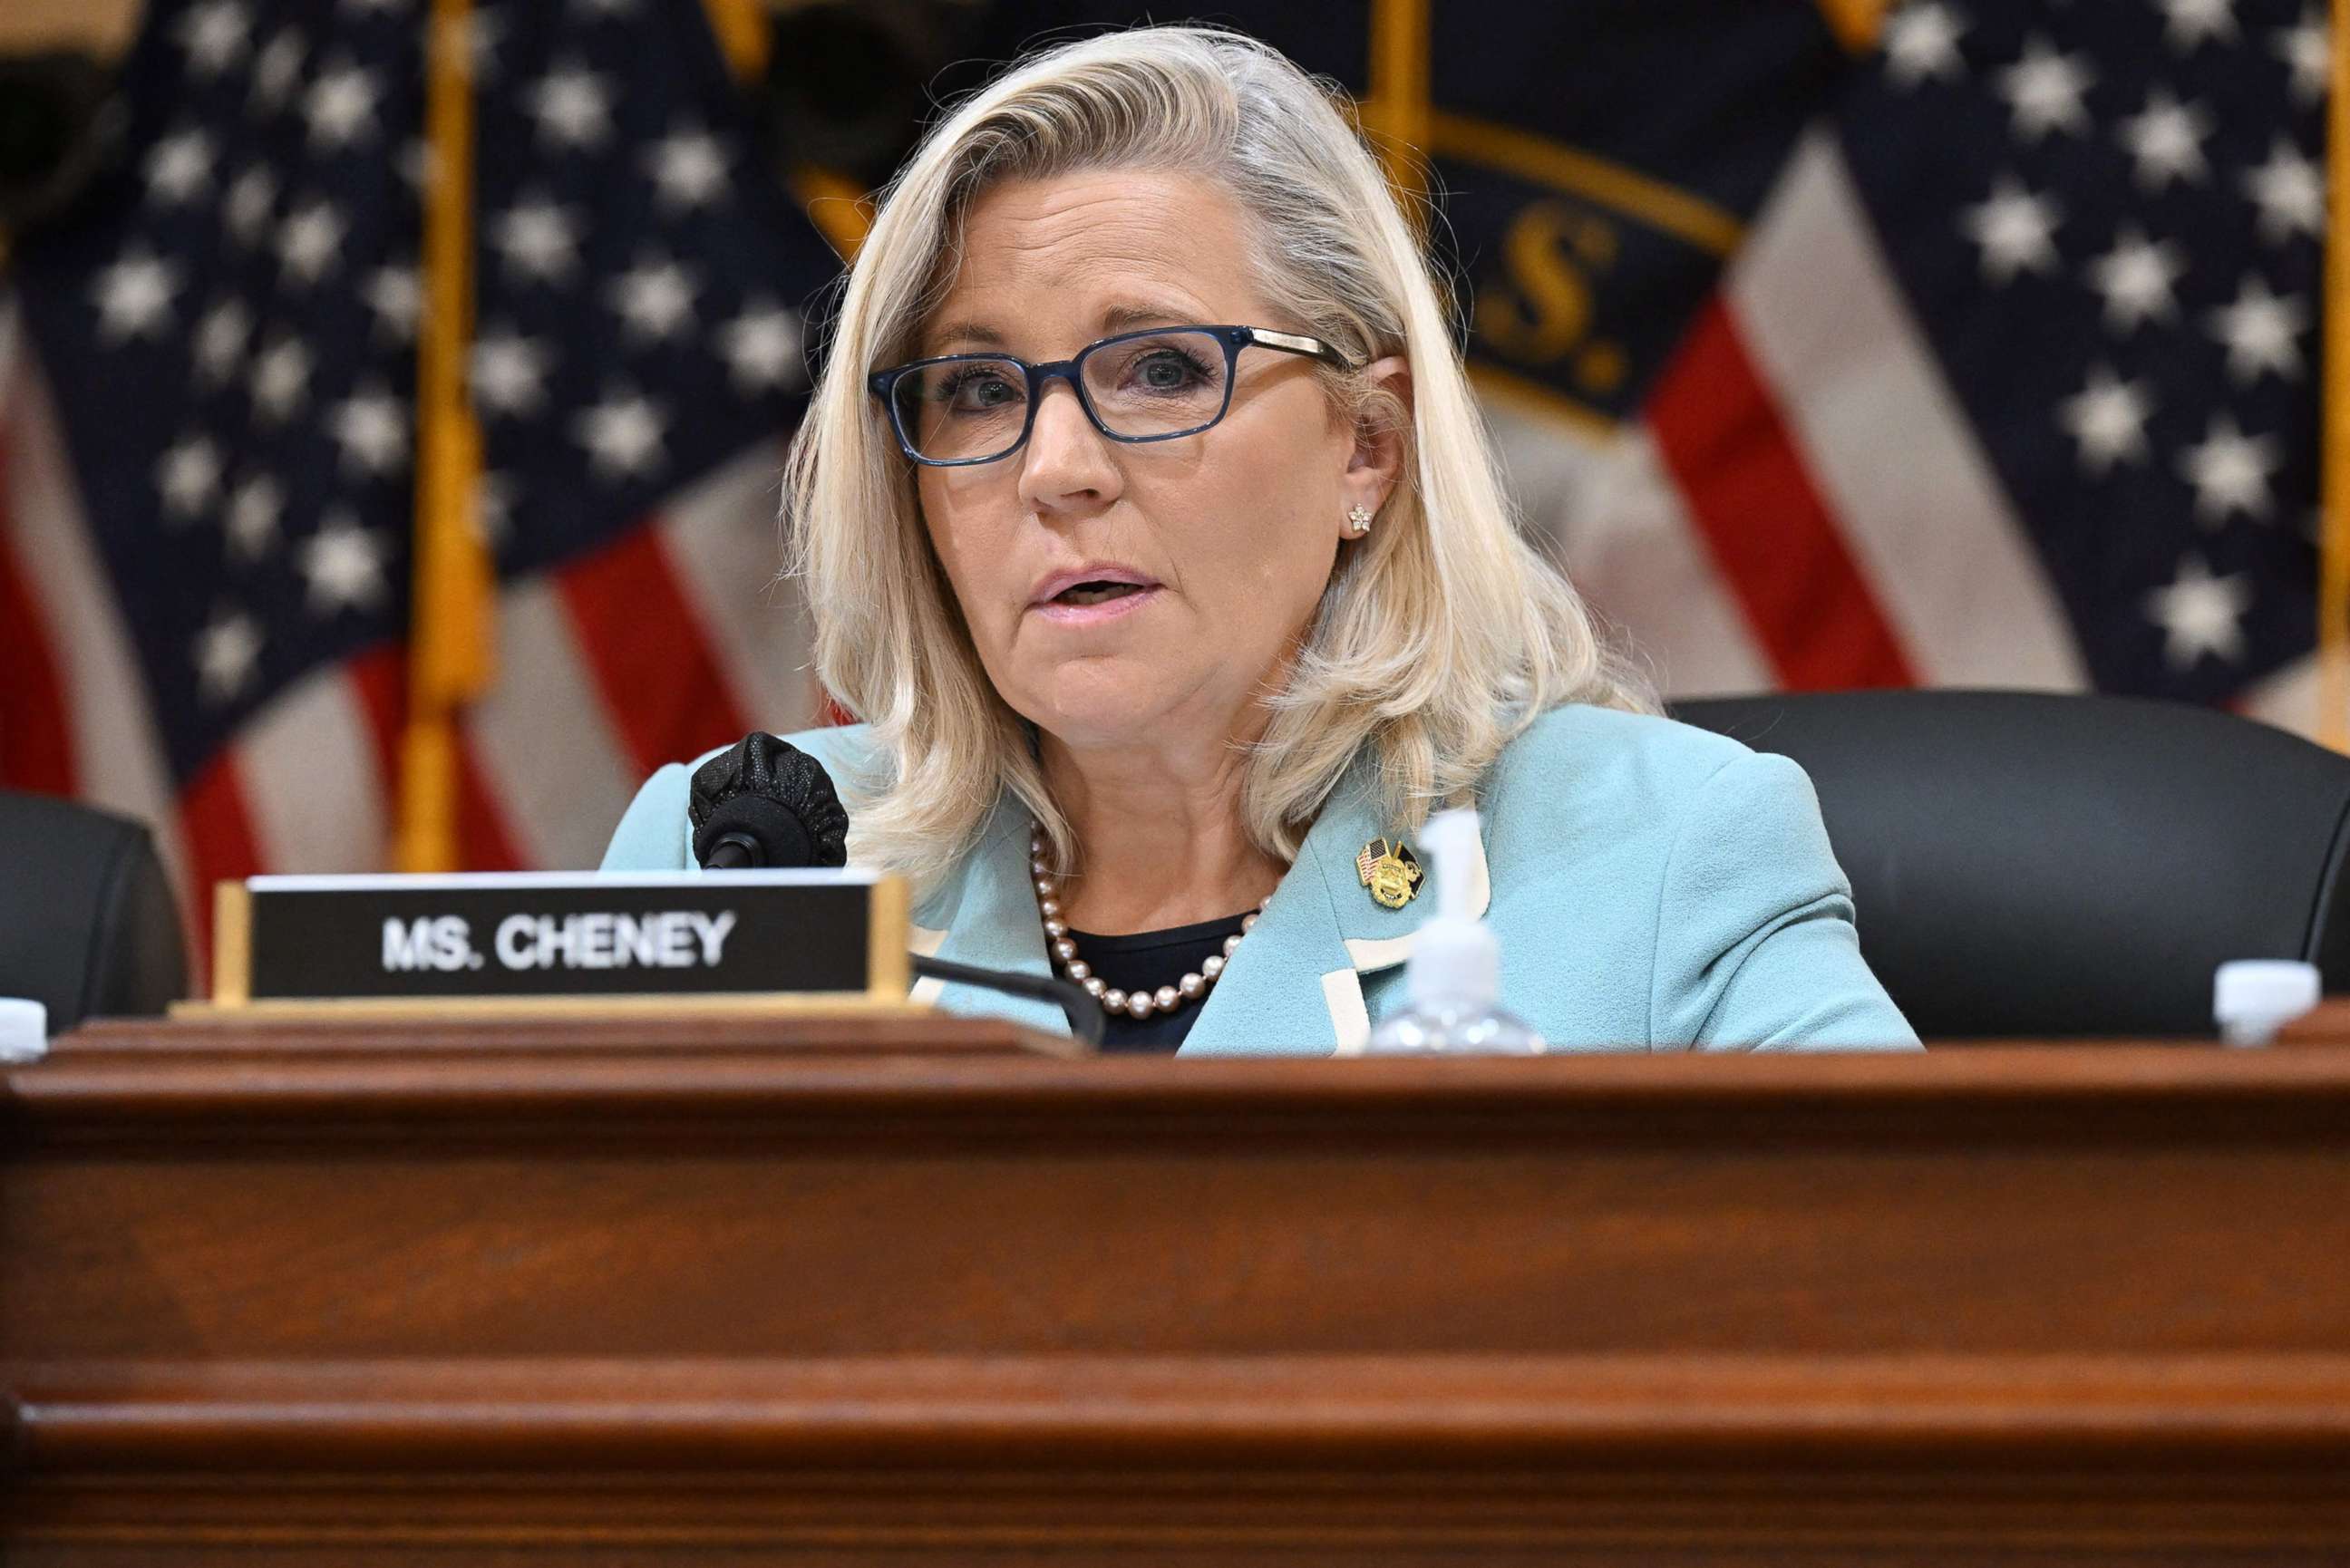 PHOTO: Vice Chairwoman Rep. Liz Cheney speaks during a hearing by the Select Committee to Investigate the January 6th Attack on the US Capitol, on June 13, 2022 in Washington, D.C.